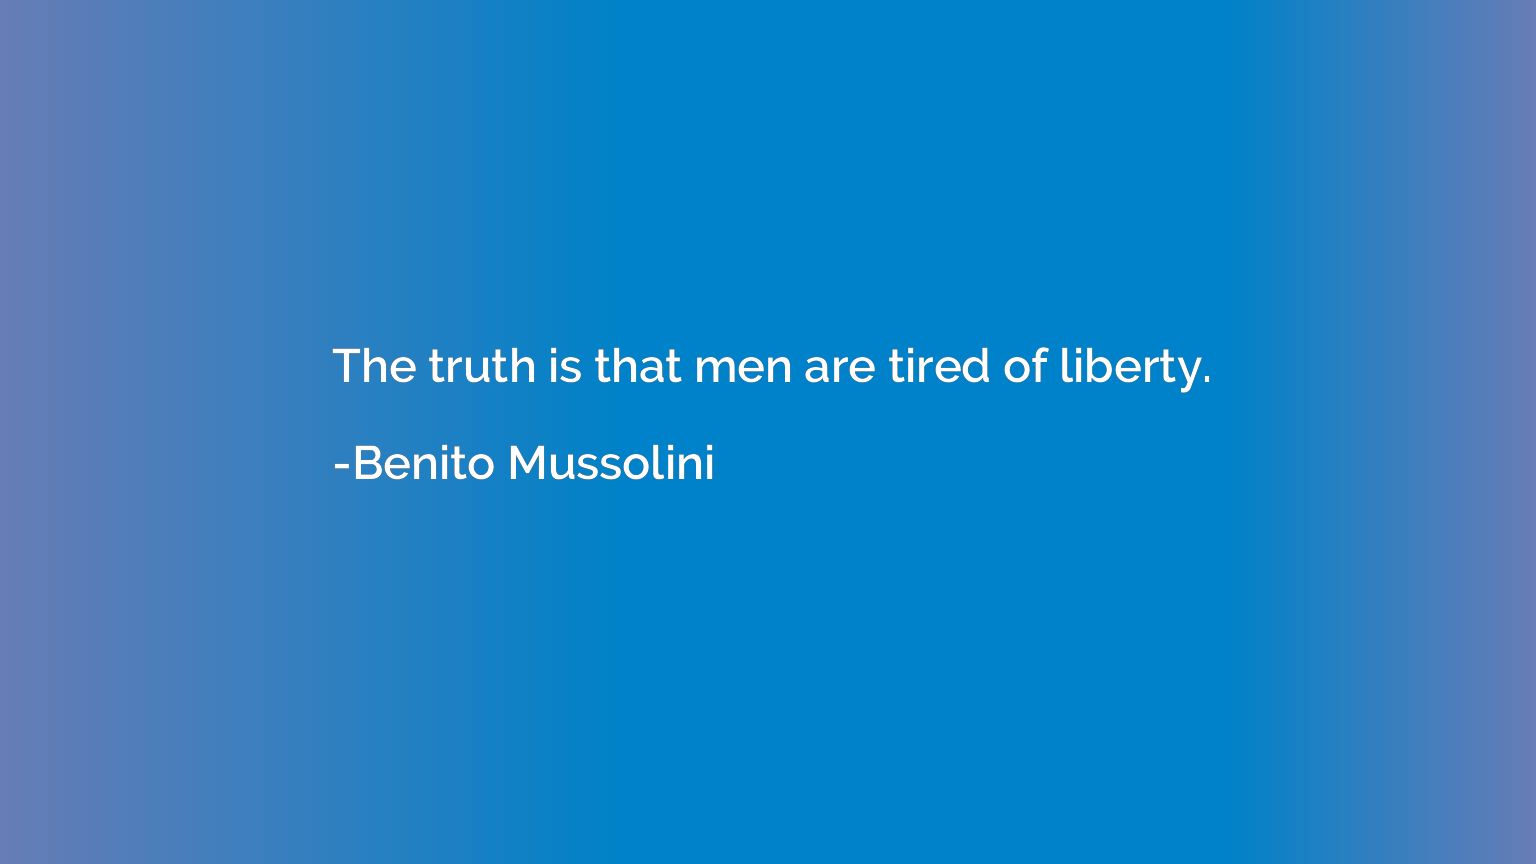 The truth is that men are tired of liberty.